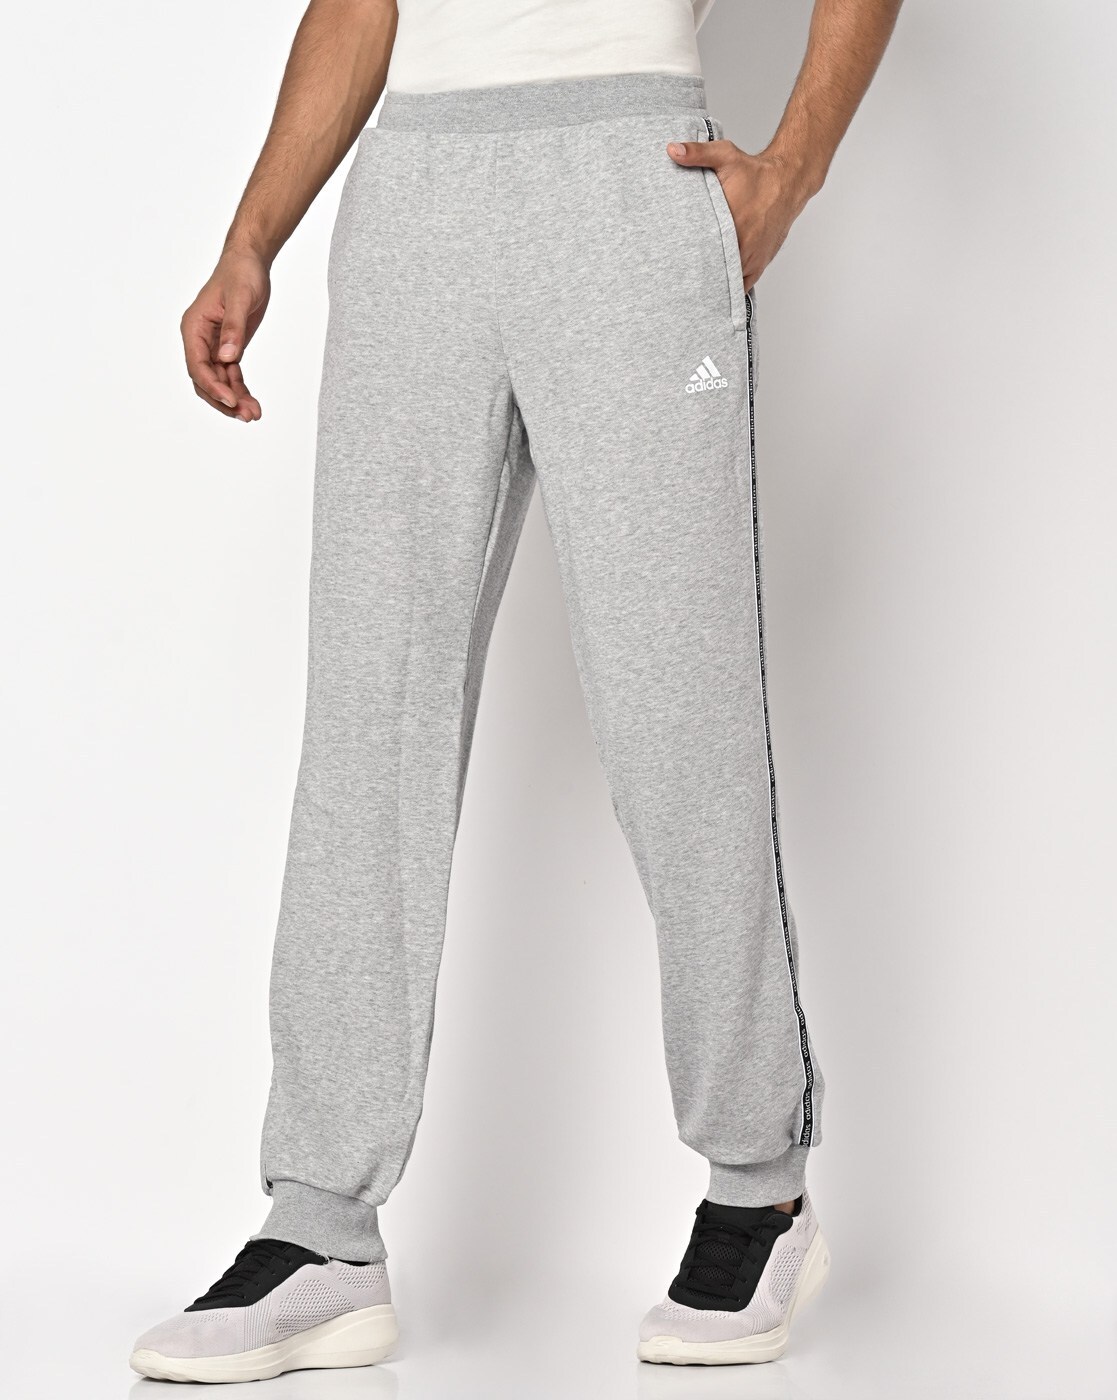 Buy ADIDAS Cotton Regular Fit Mens Casual Track Pants  Shoppers Stop